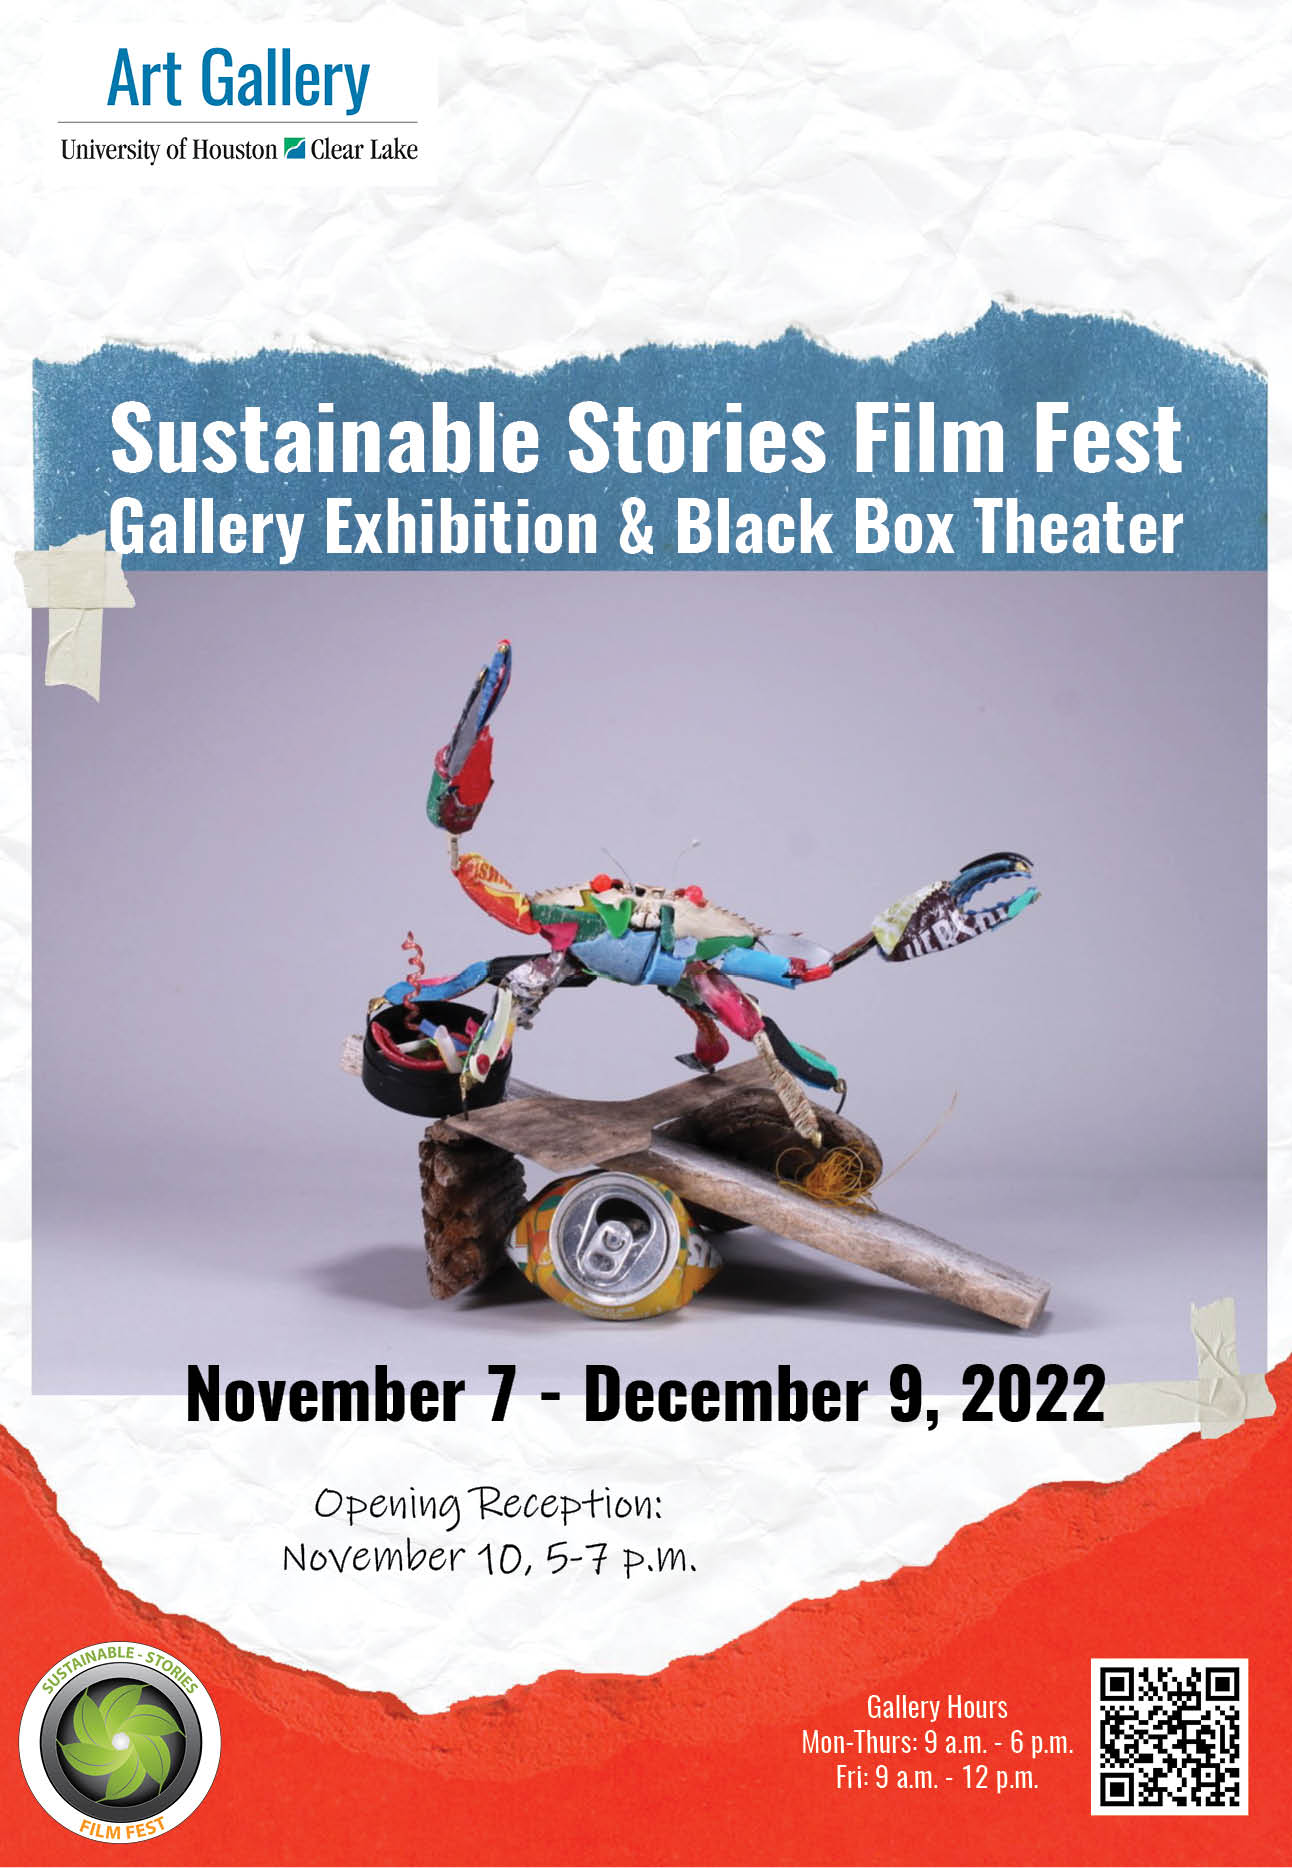 Sustainable Stories Film Fest Gallery Exhibition & Black Box Theater